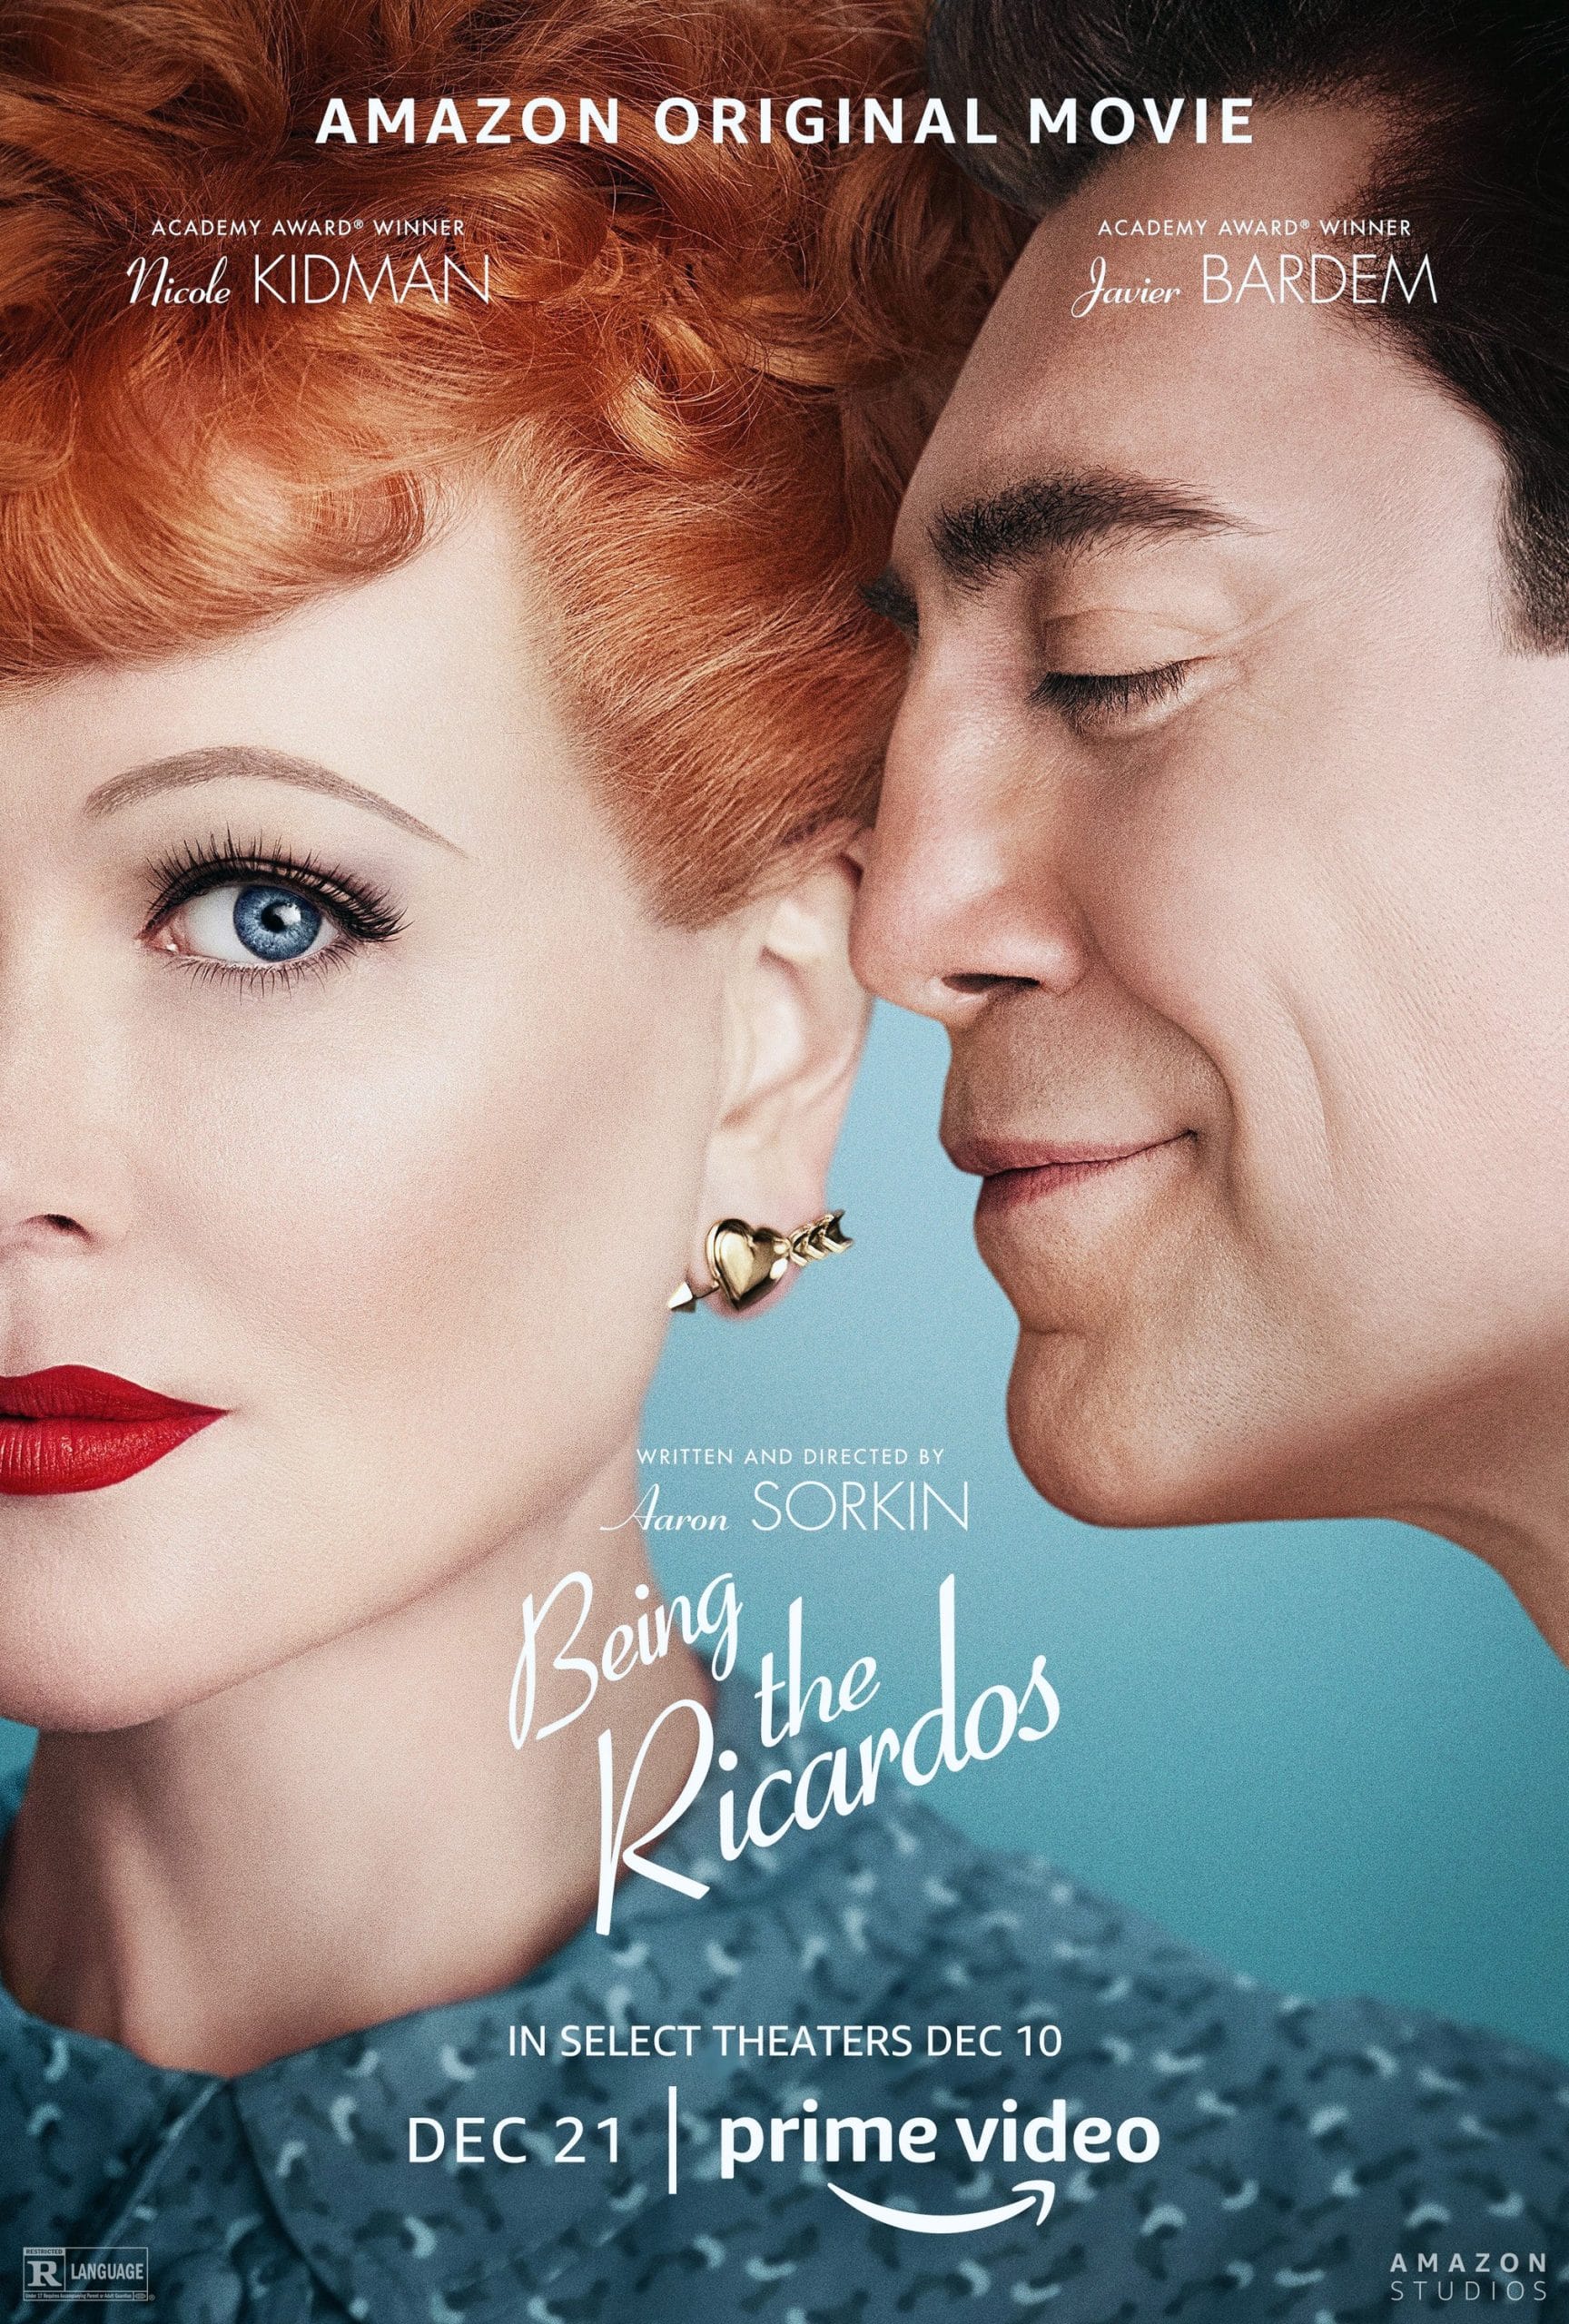 BEING THE RICARDOS, US poster, from left: Nicole Kidman as Lucille Ball, Javier Bardem as Desi Arnaz